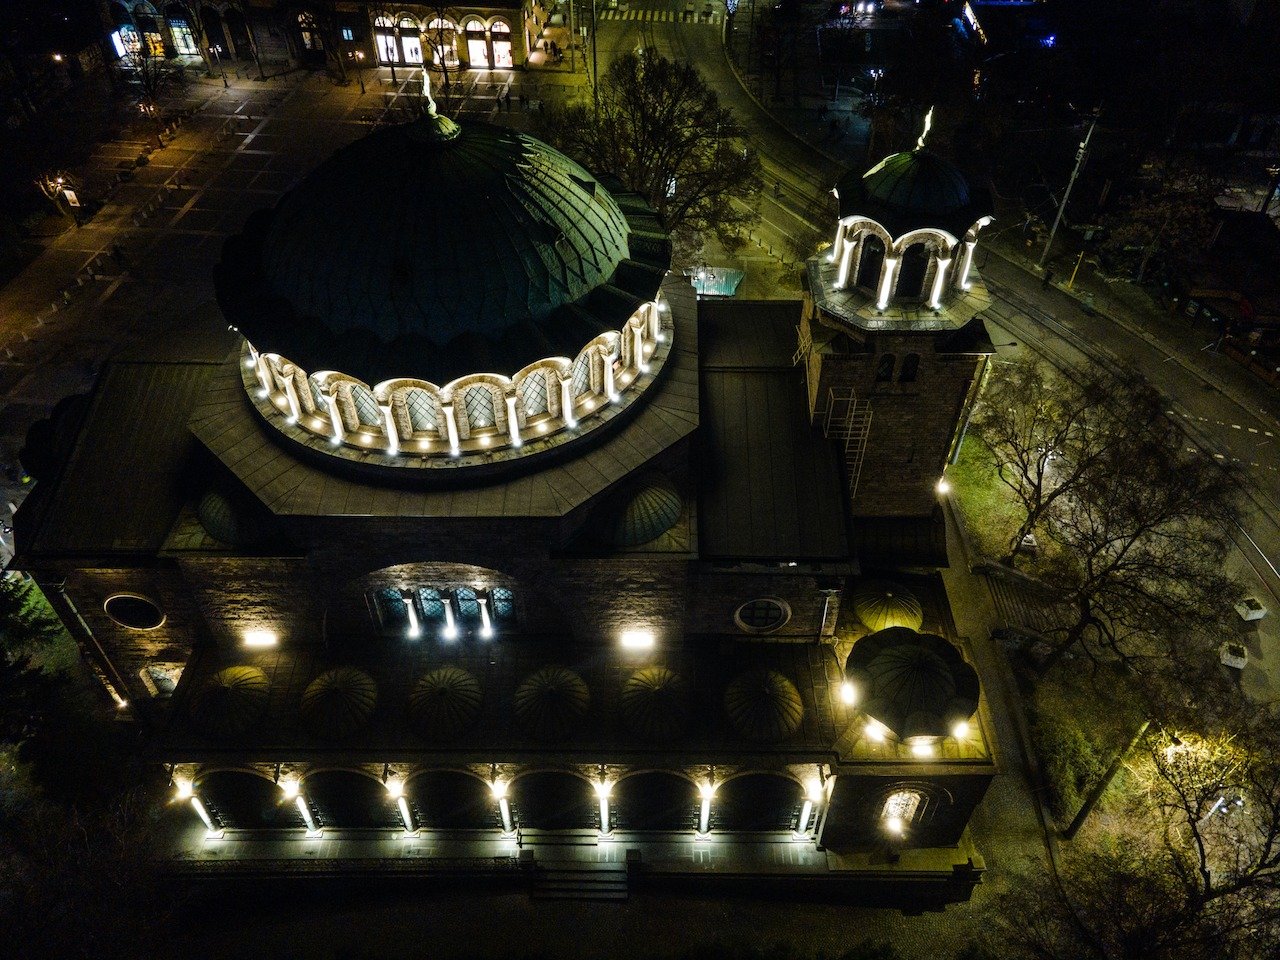 📍 St. Nedelya Cathedral Church, Sofia, Bulgaria

I rarely fly Toby at night, mainly because most country laws forbid it. Luckily, I found a nice area in Sofia where I could capture the night lights of St. Nedelya Cathedral Church. I surely did love 